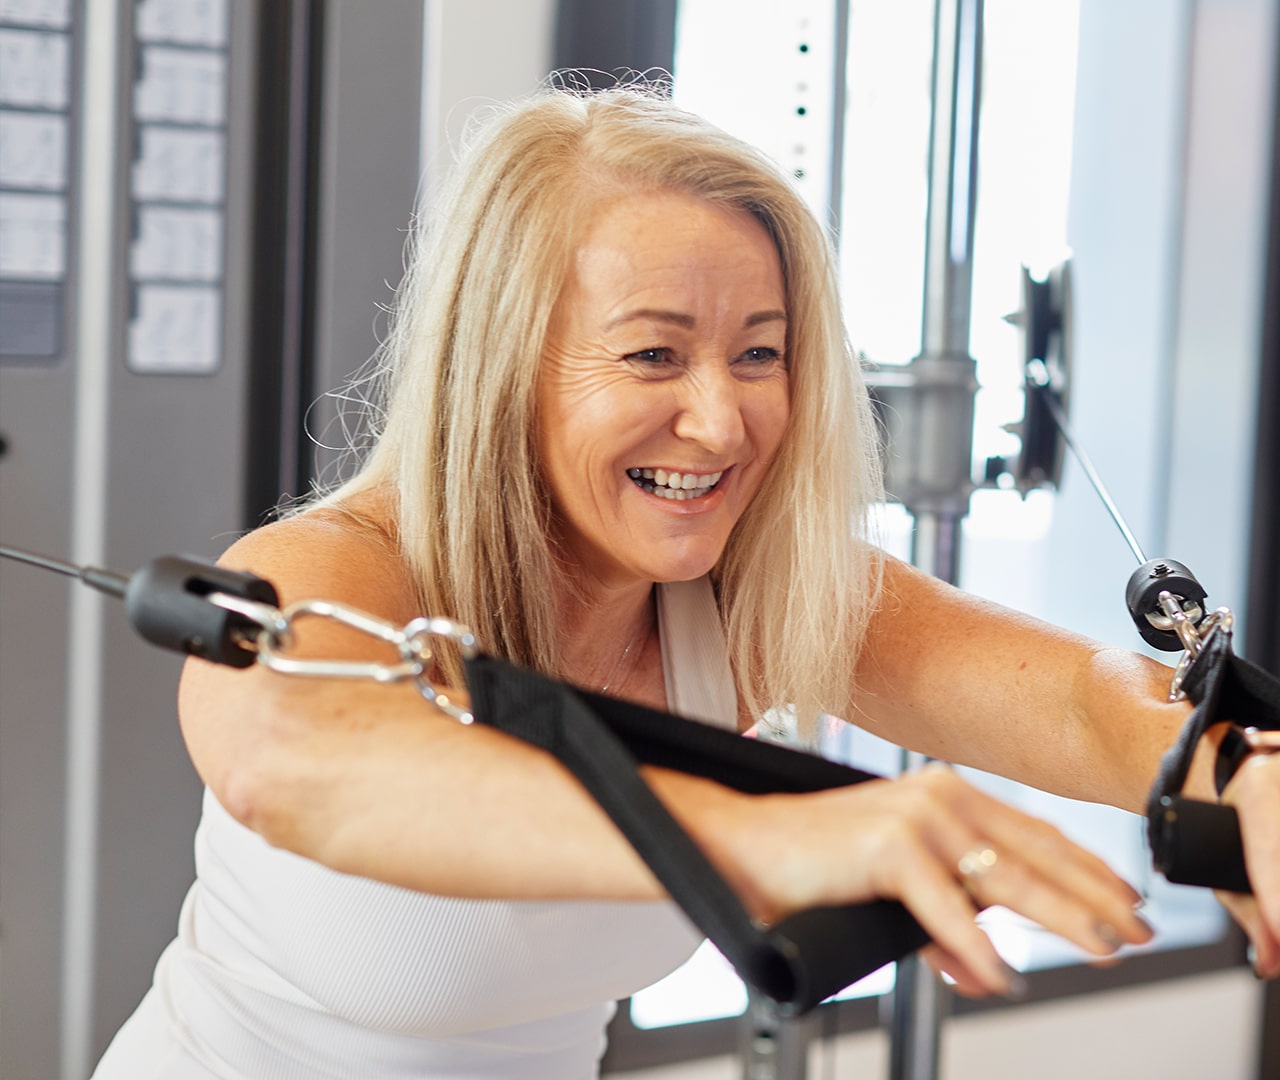 Lady smiling and using a weights machine